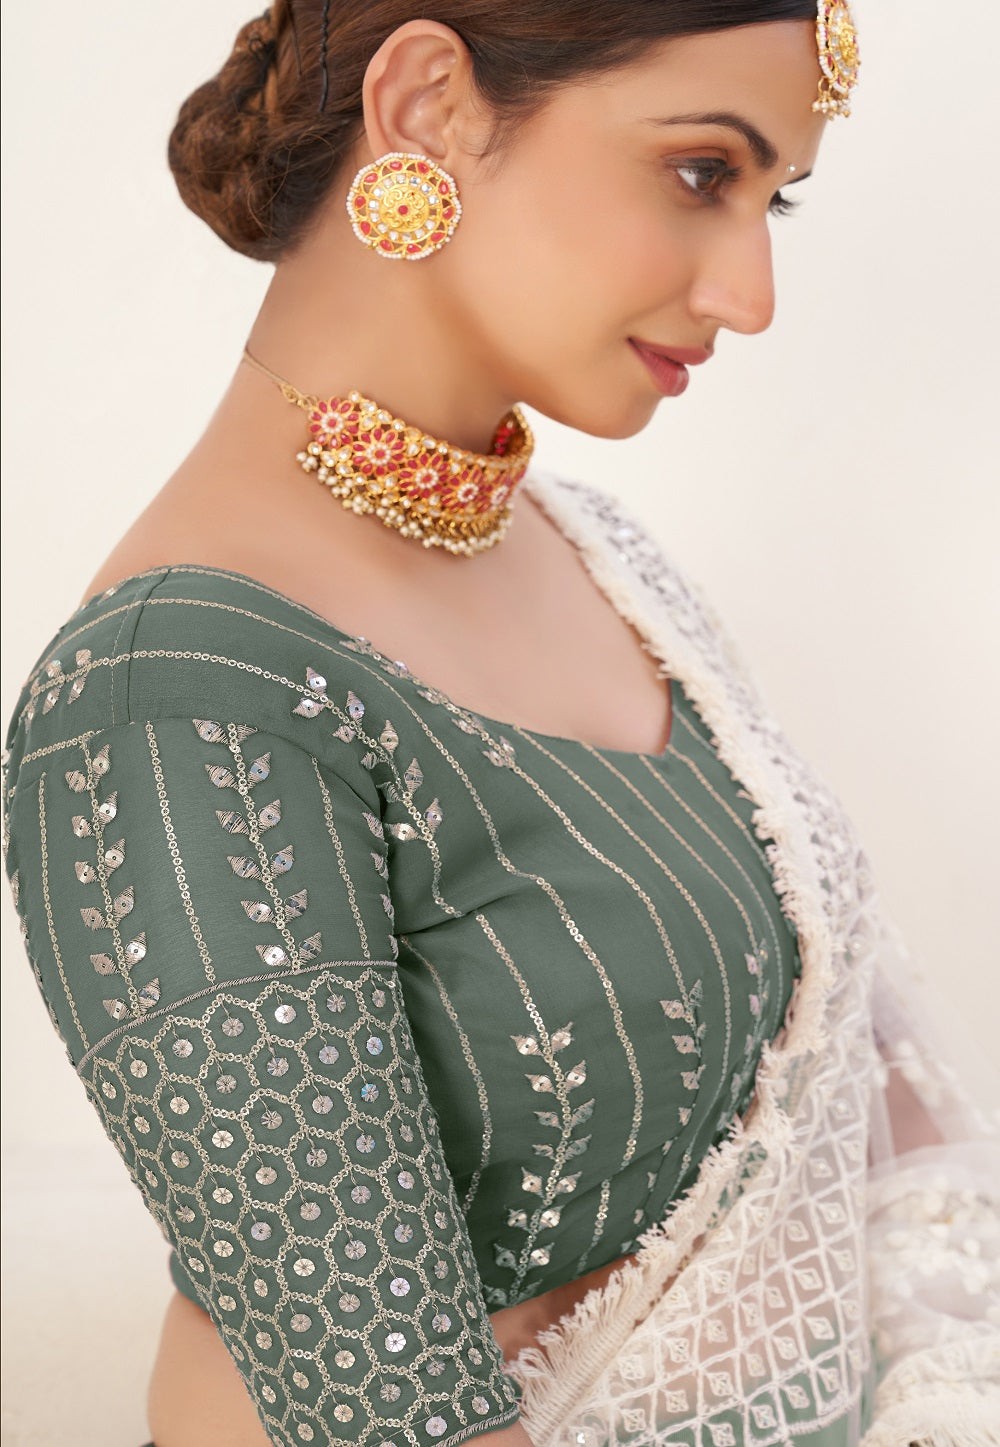 Georgette Embroidered Lehenga in Olive Green